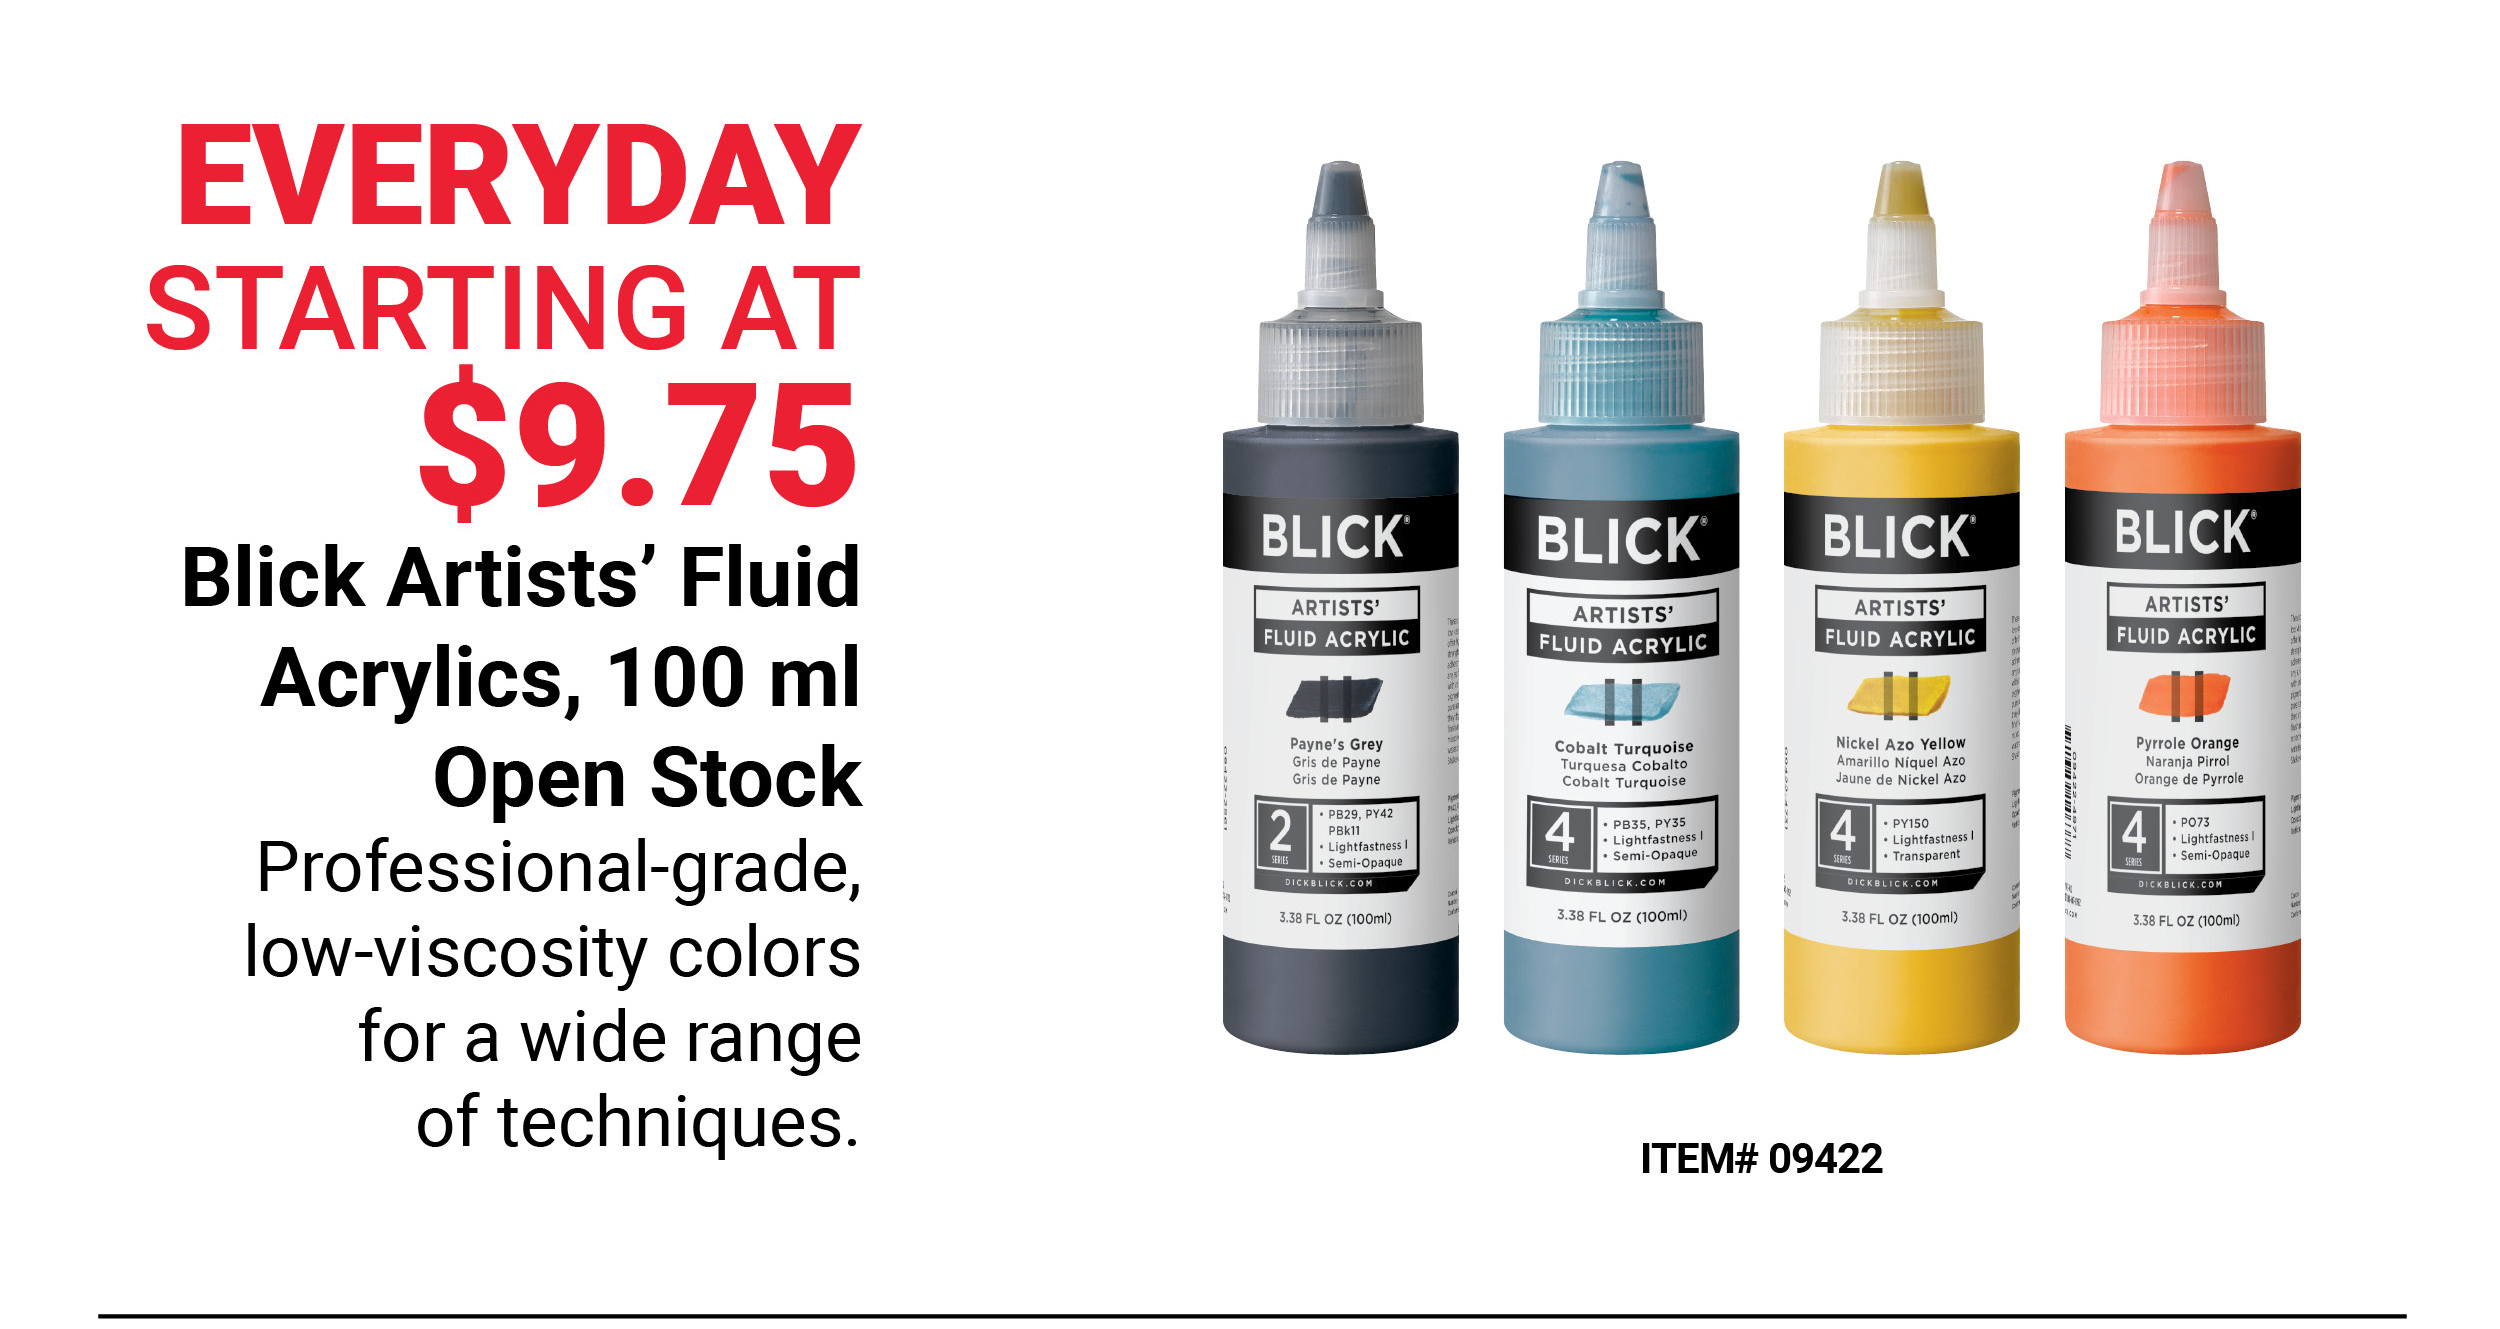 Blick Artists' Fluid Arylics, 100 ml Open Stock Everyday Starting at $9.75